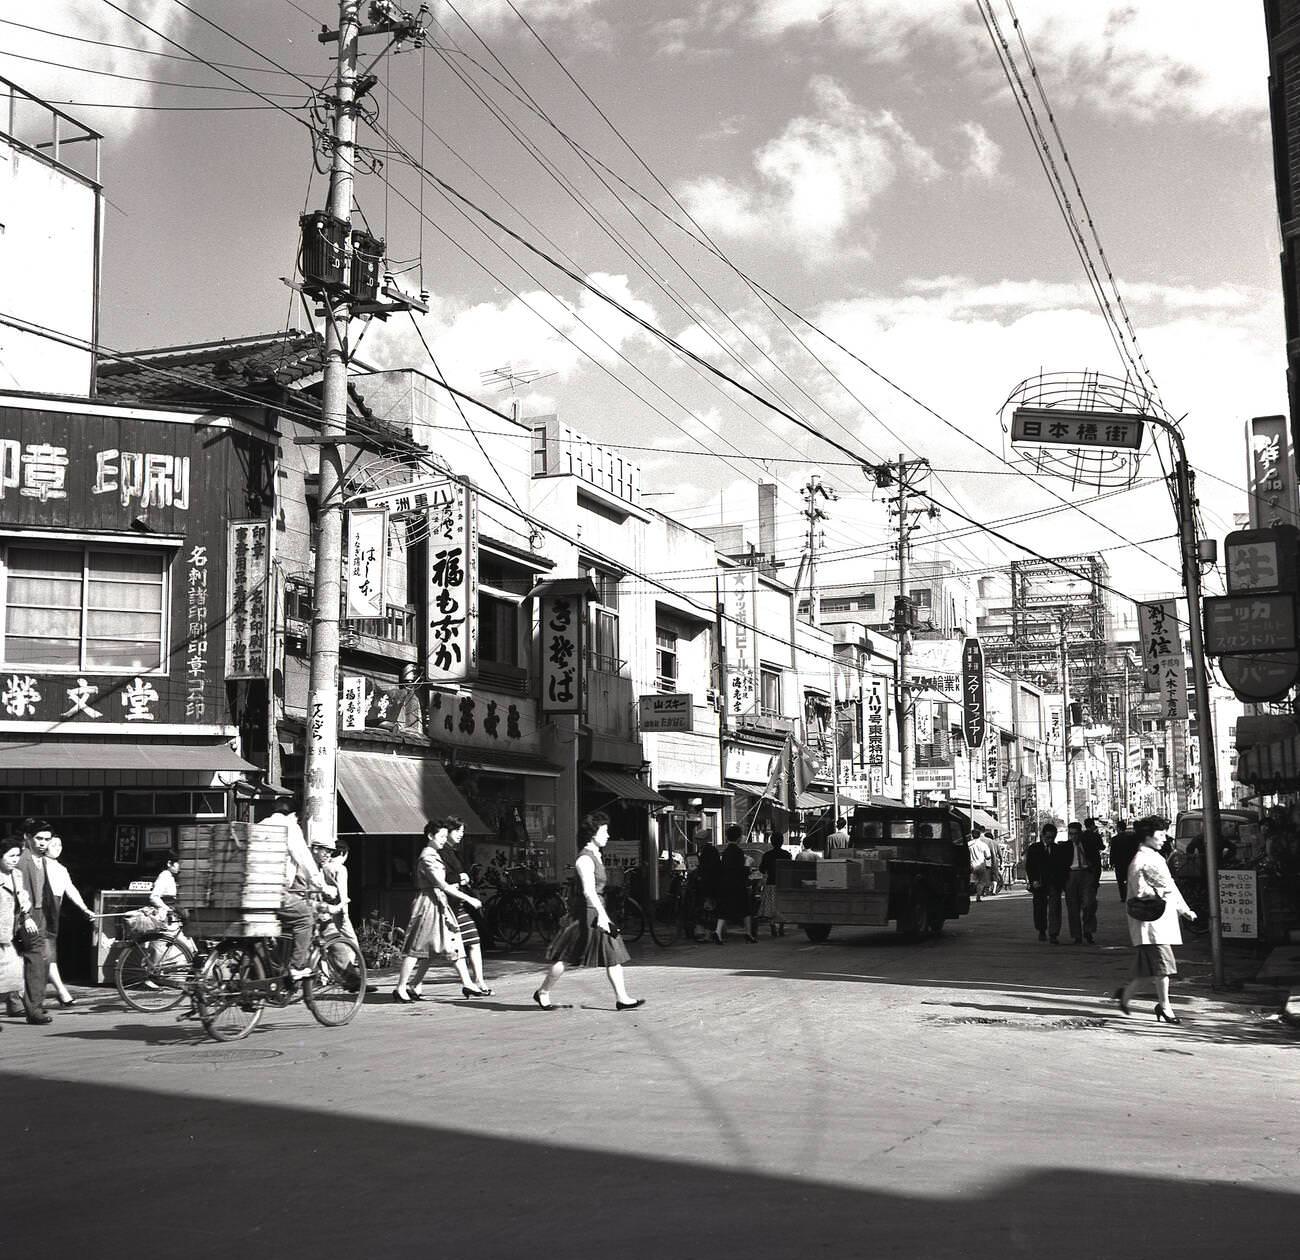 A street in the old town district of Tokyo, 1950s.